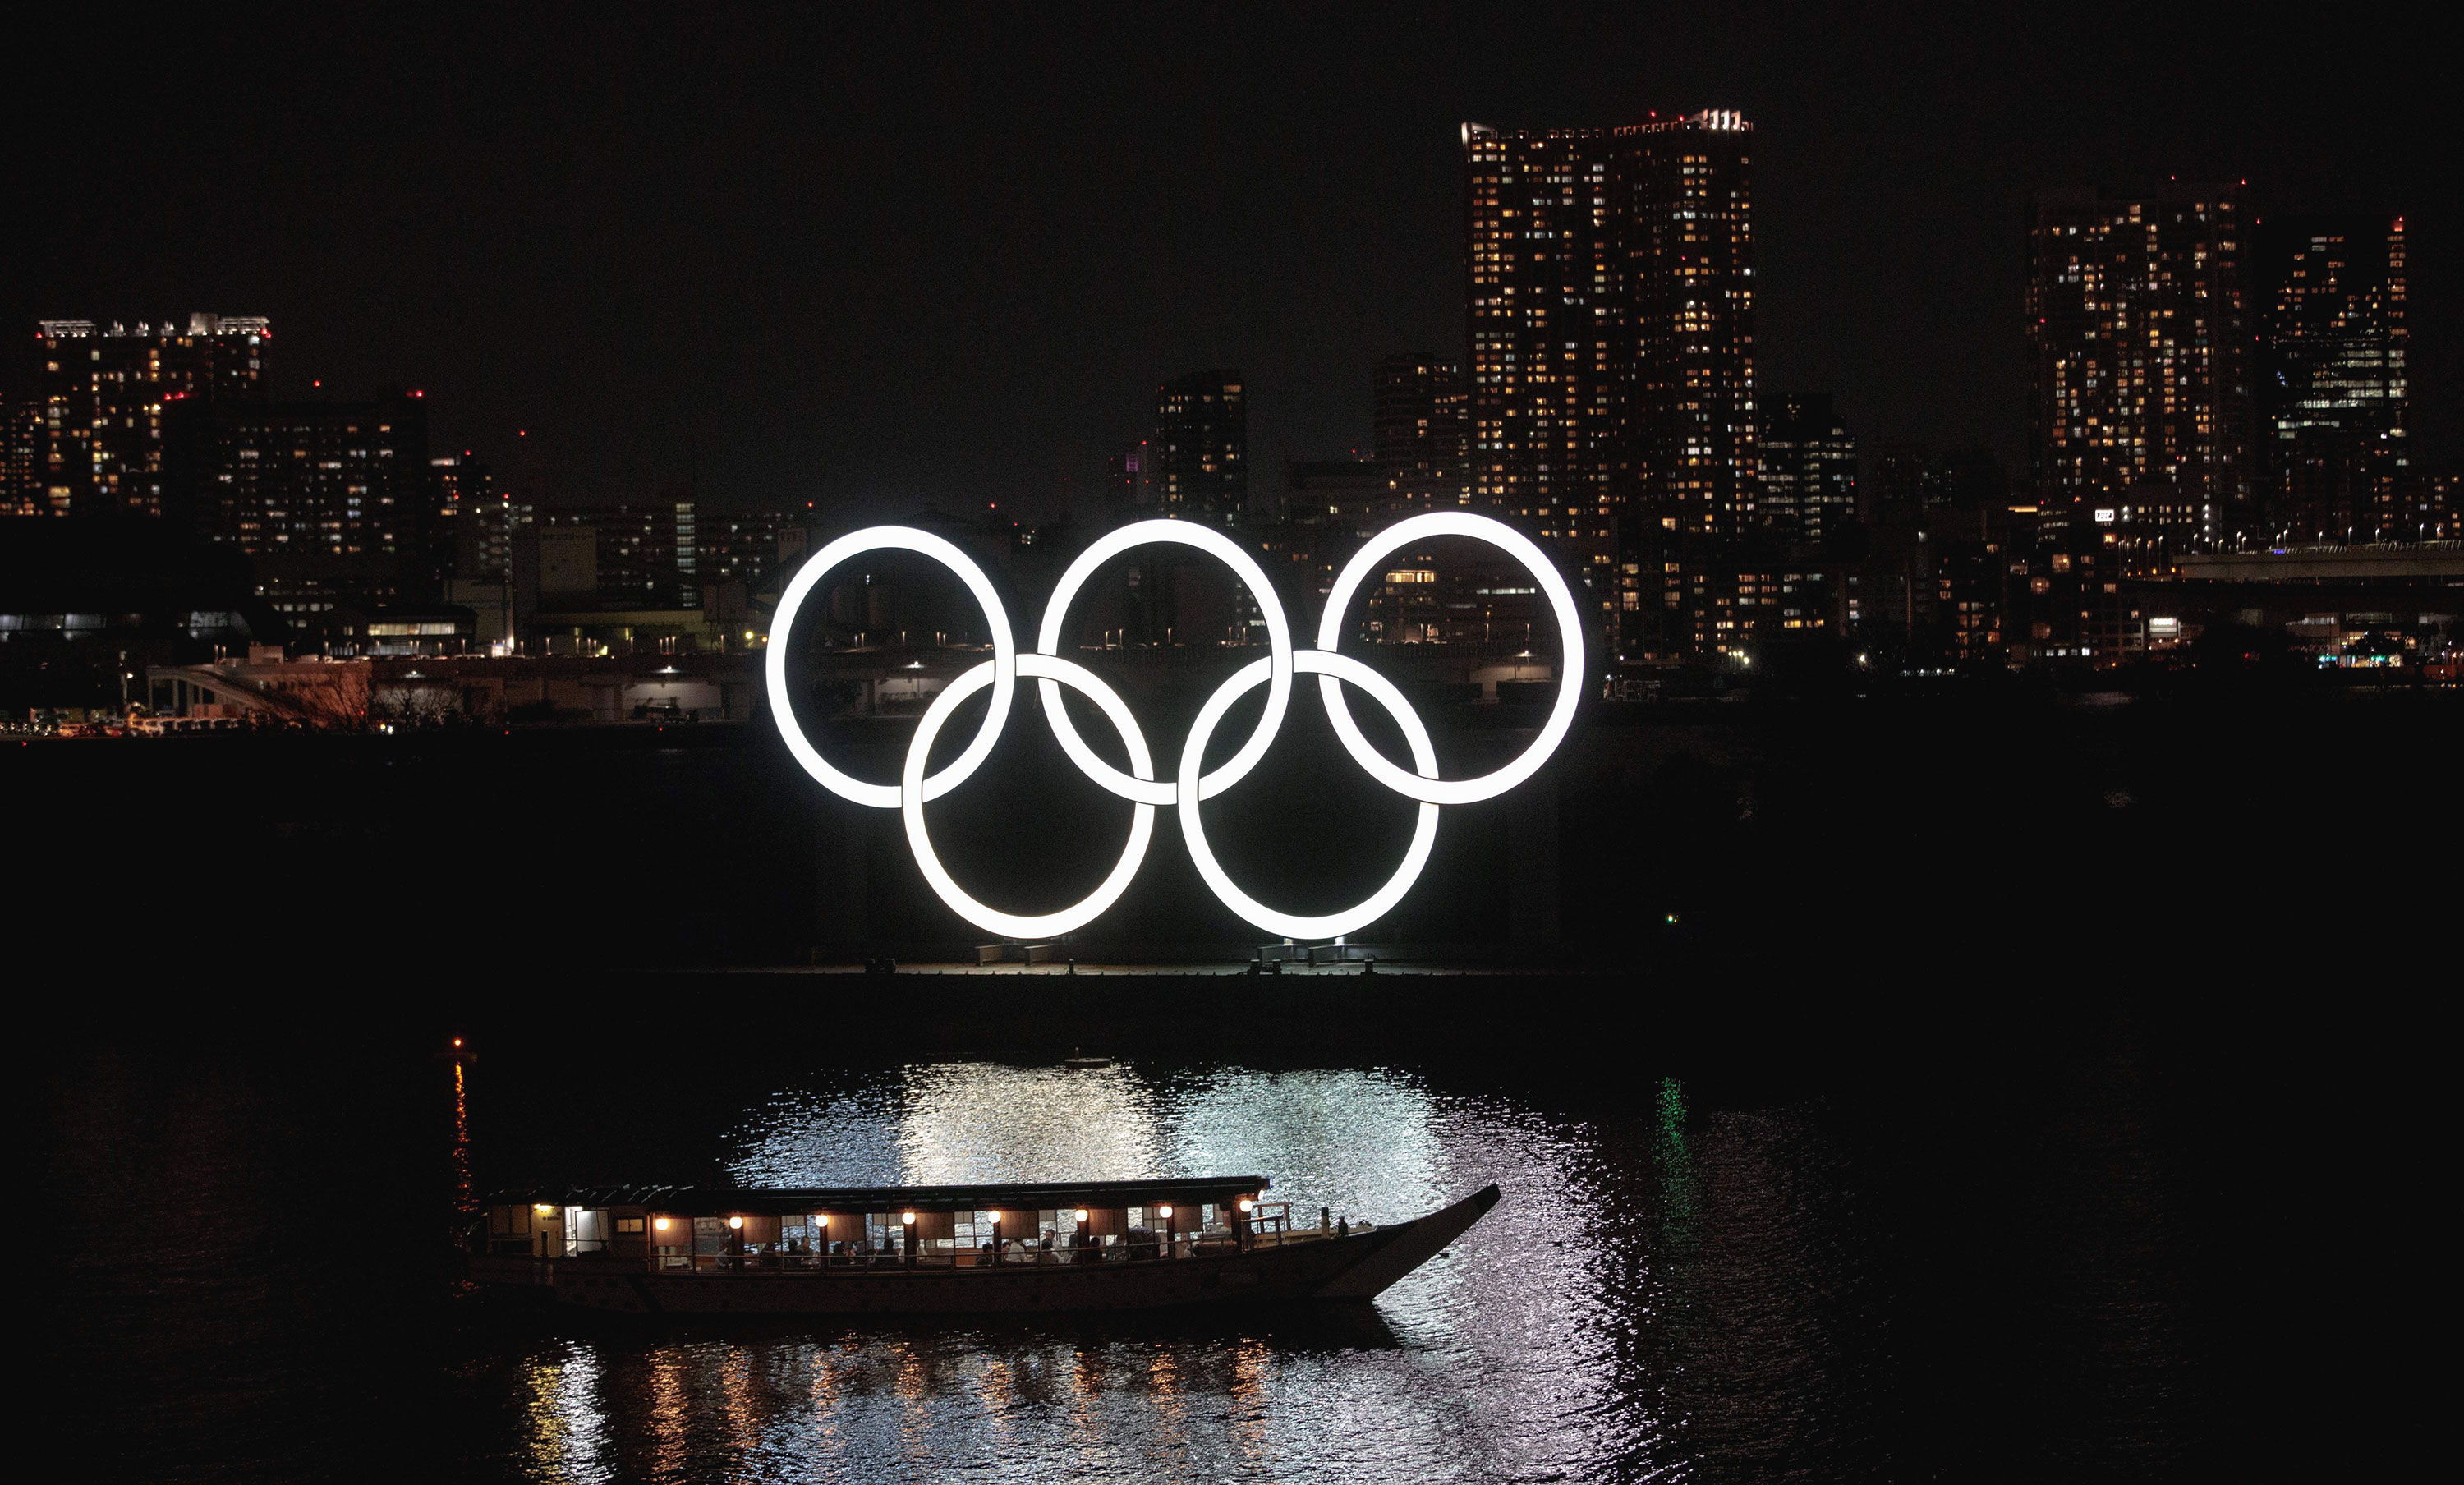 A boat passes by the Olympic rings in Tokyo's Odaiba district on March 23.